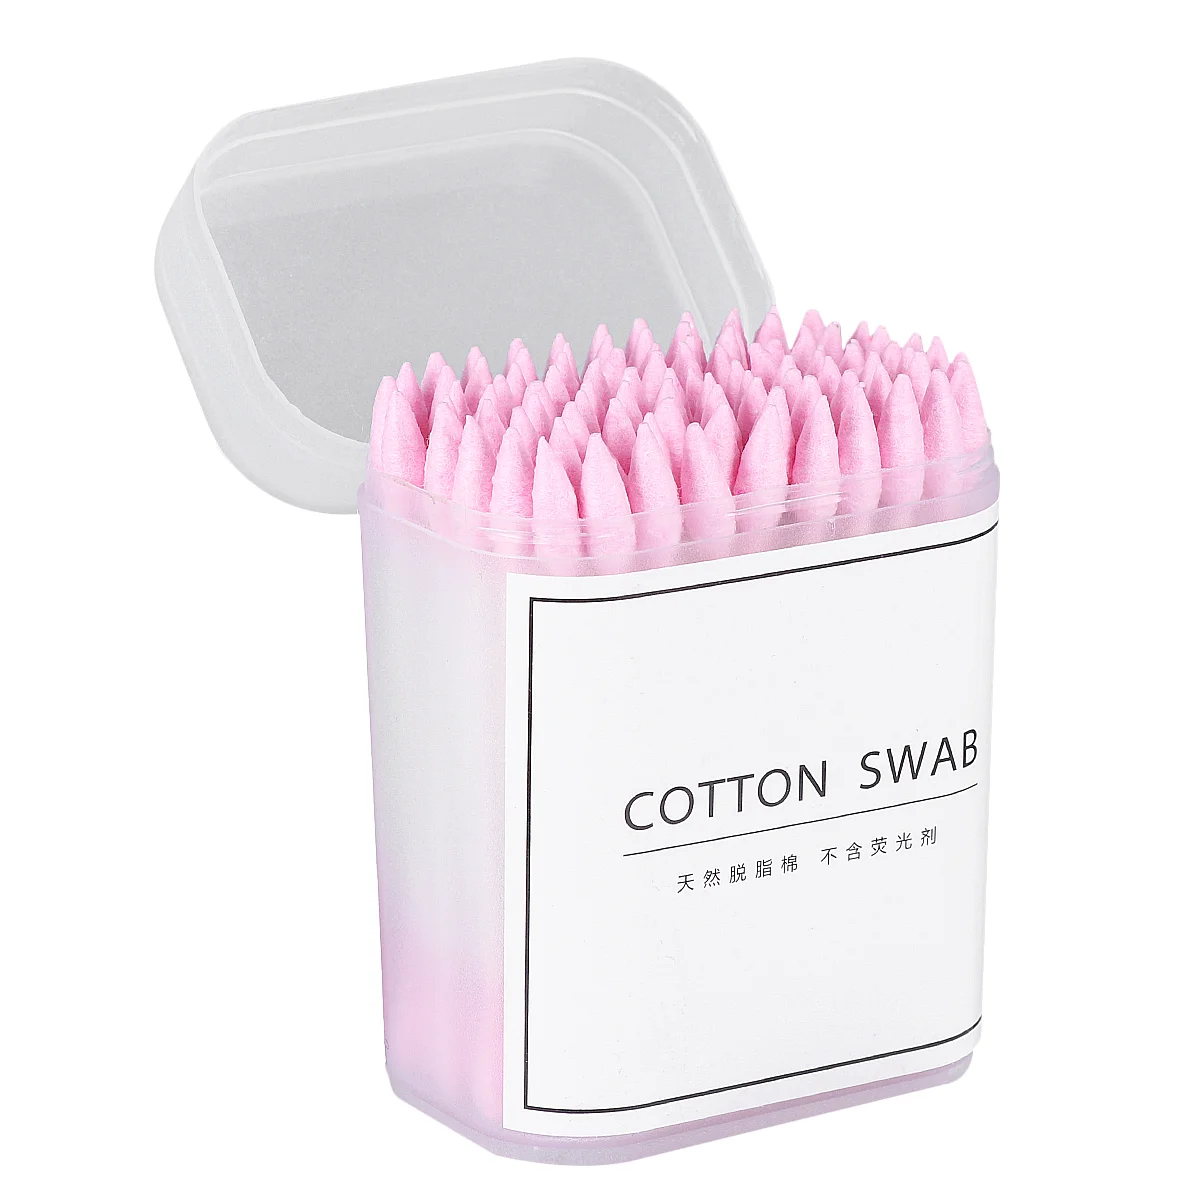 

300pcs Precision Tip Cotton Swabs Makeup Cotton Buds Cleaning Ear Double Tipped Cotton Buds for Makeup Ear